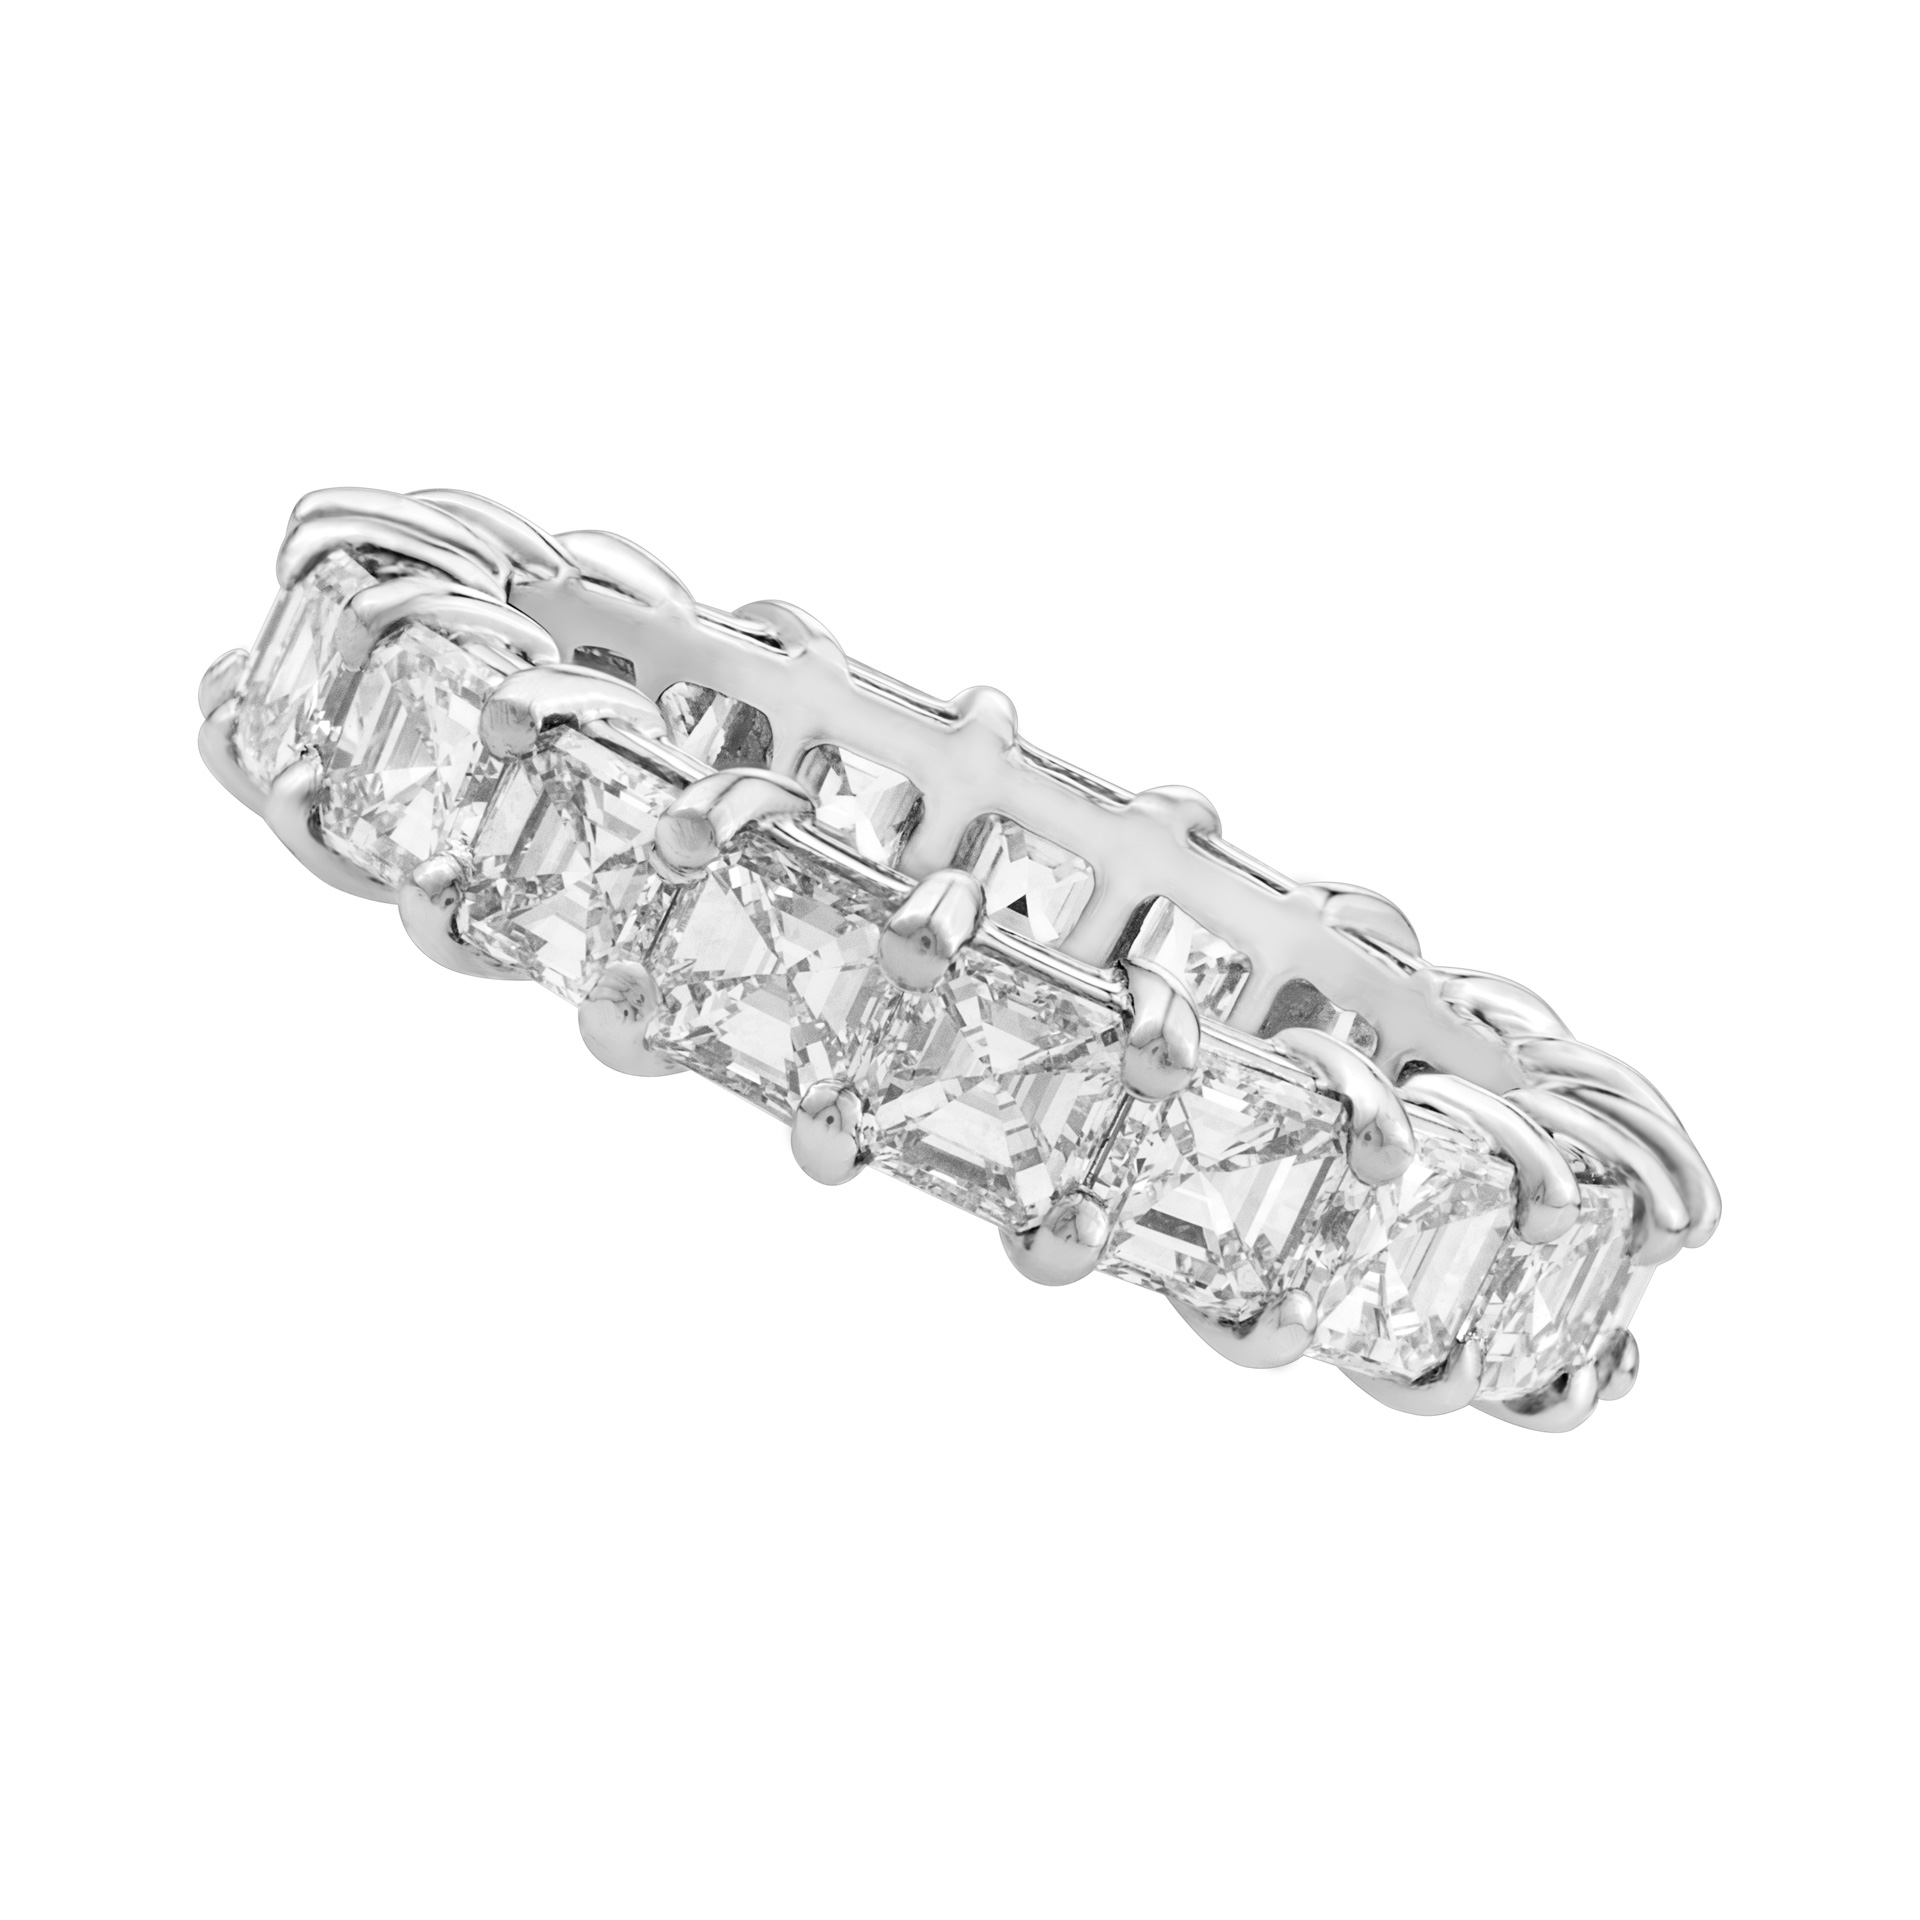 Asher cut eternity band in platinum, 4.63 carats D-F color VS clarity image 1